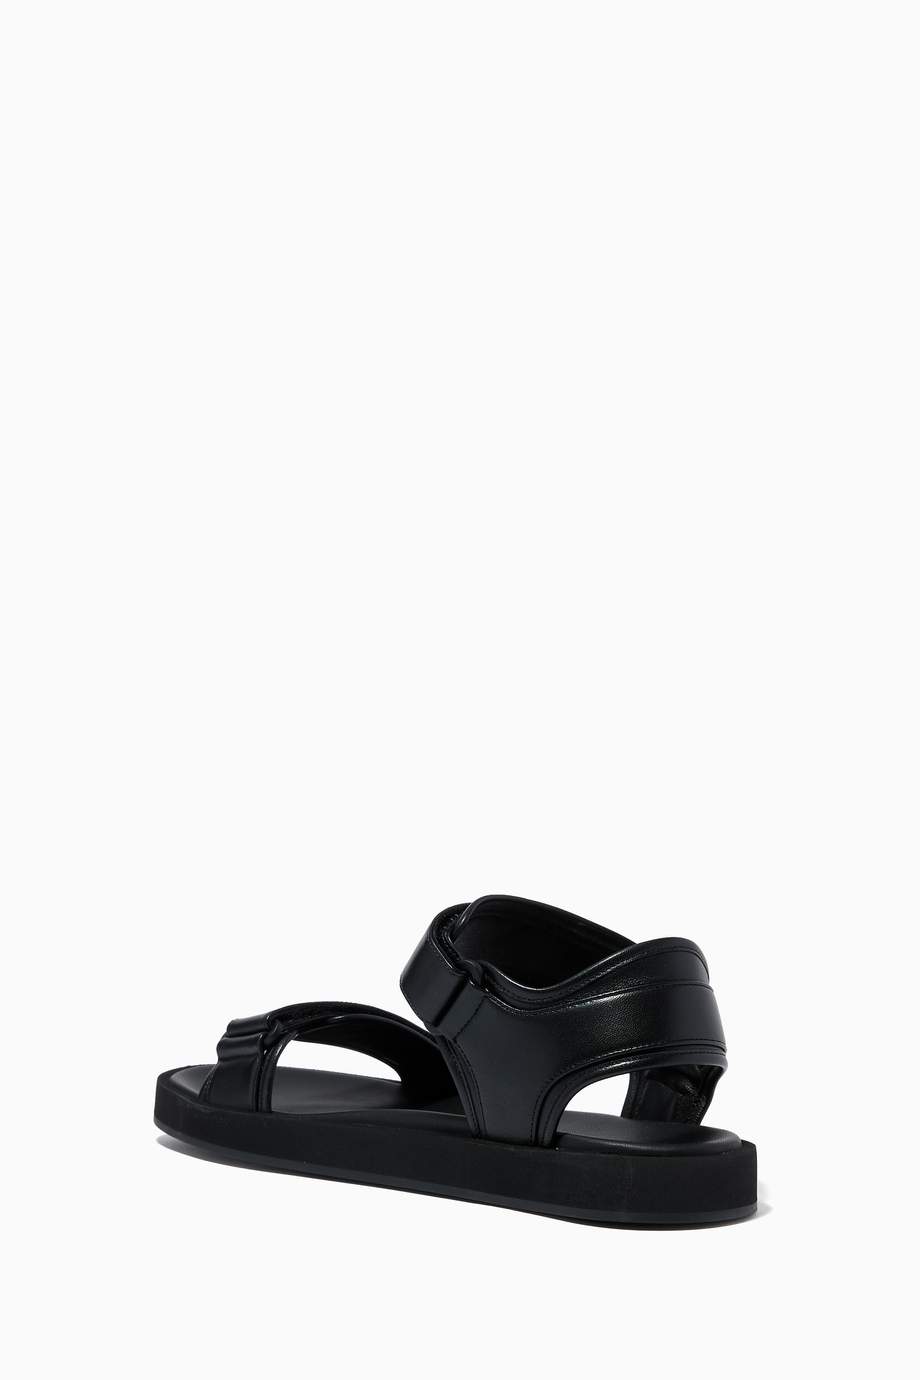 Shop The Row Black Hook-and-Loop Sandals in Nappa for Women | Ounass UAE